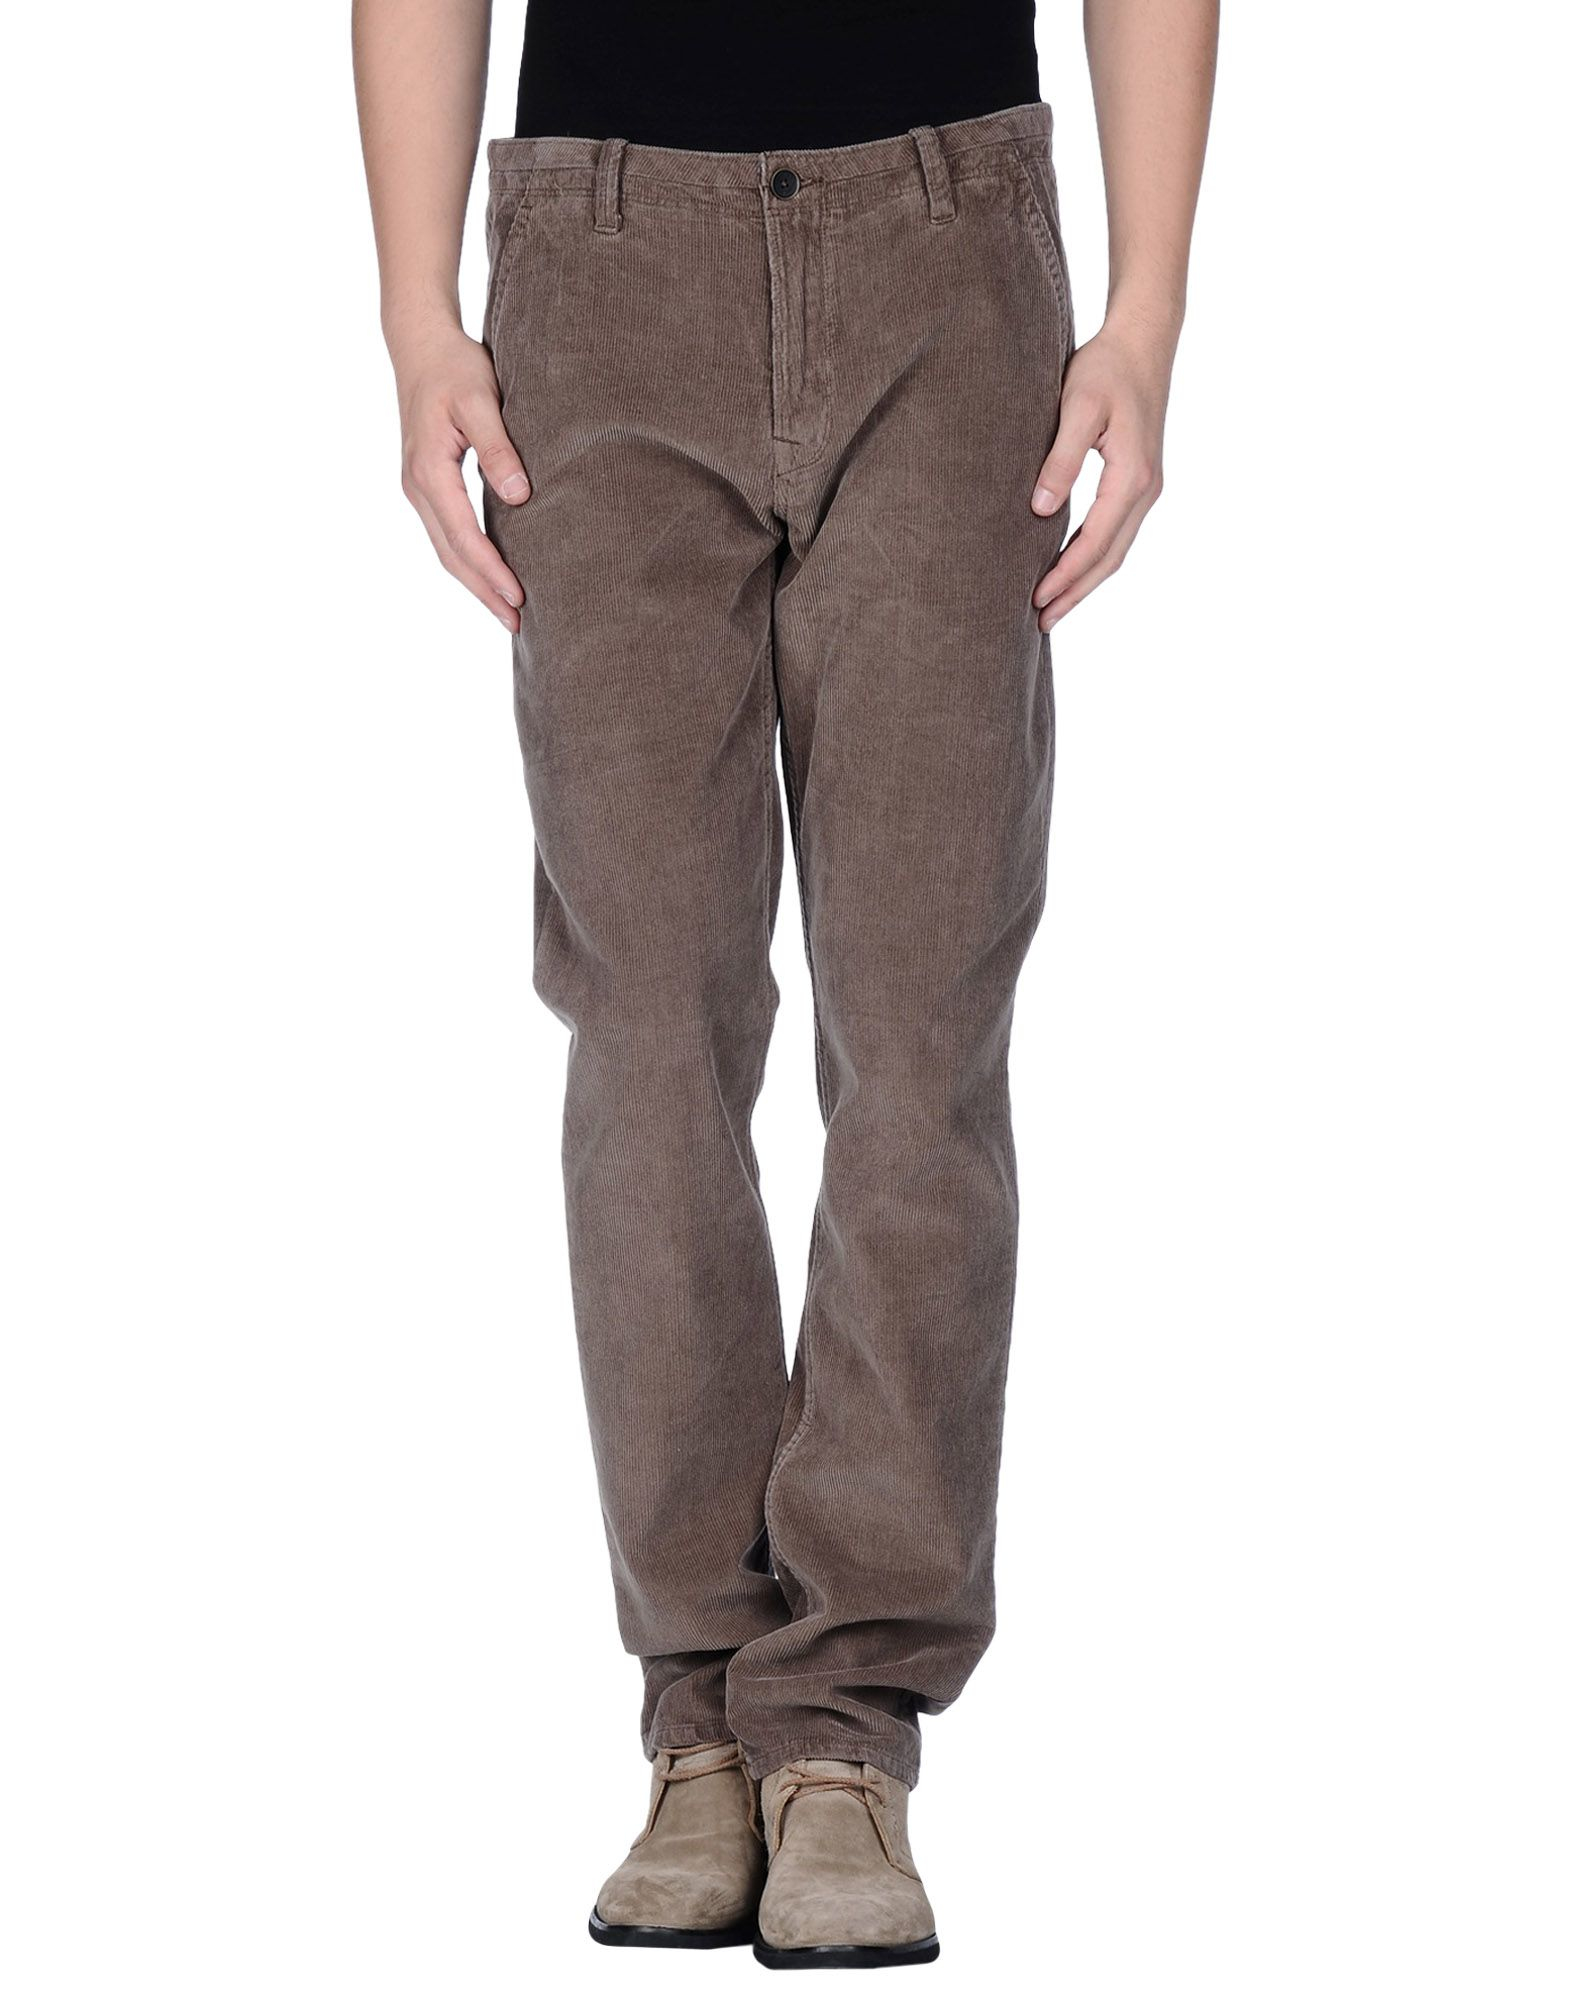 Lyst - Timberland Casual Pants in Natural for Men